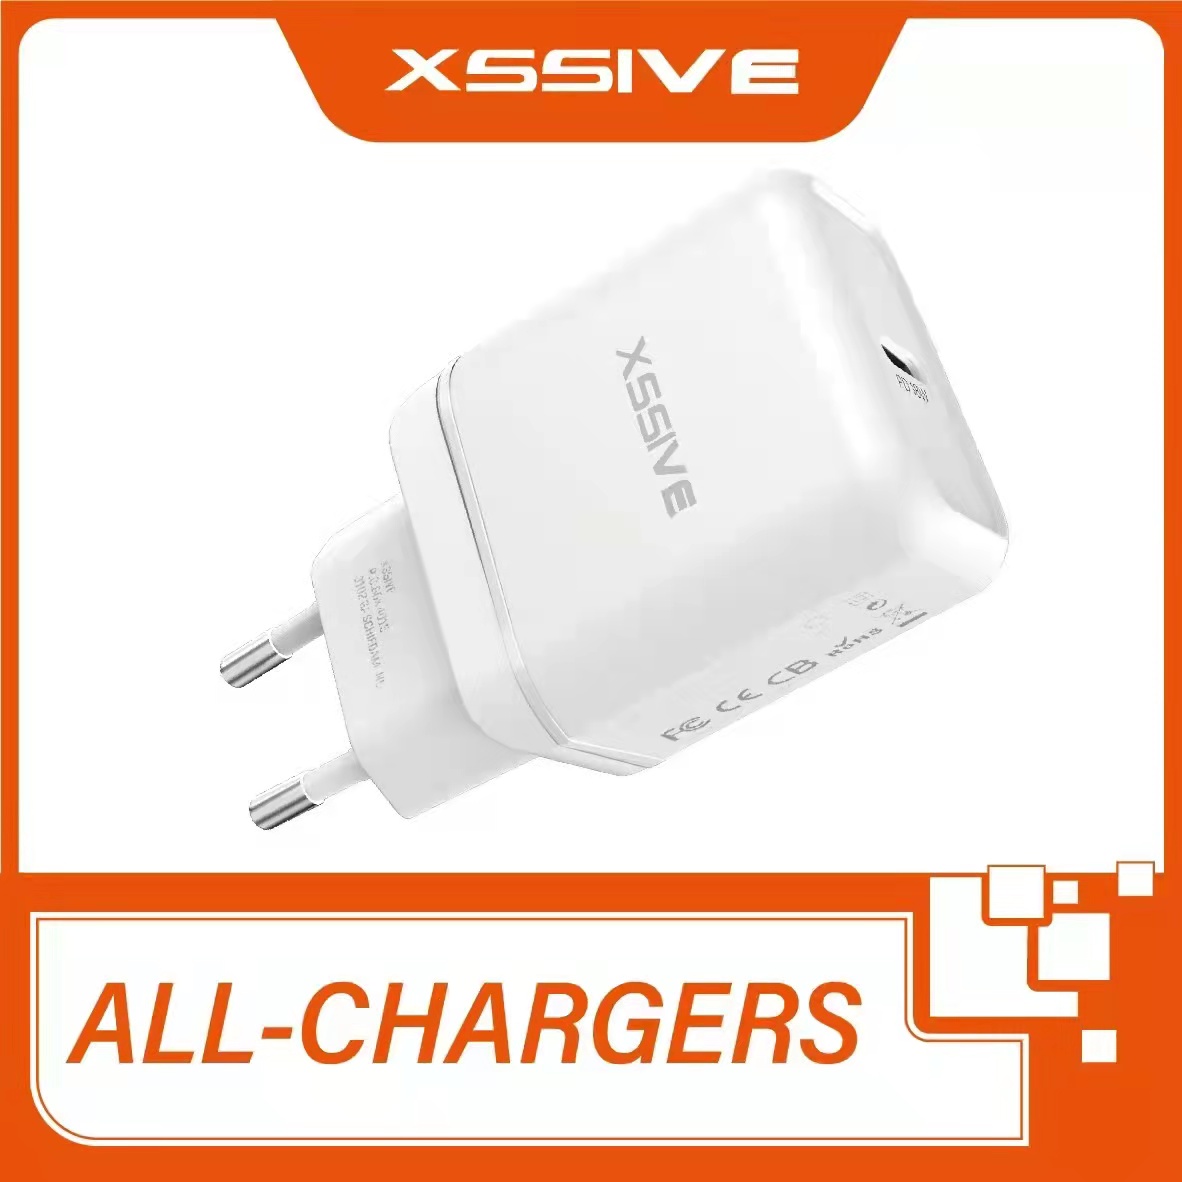 Xssive - All Chargers